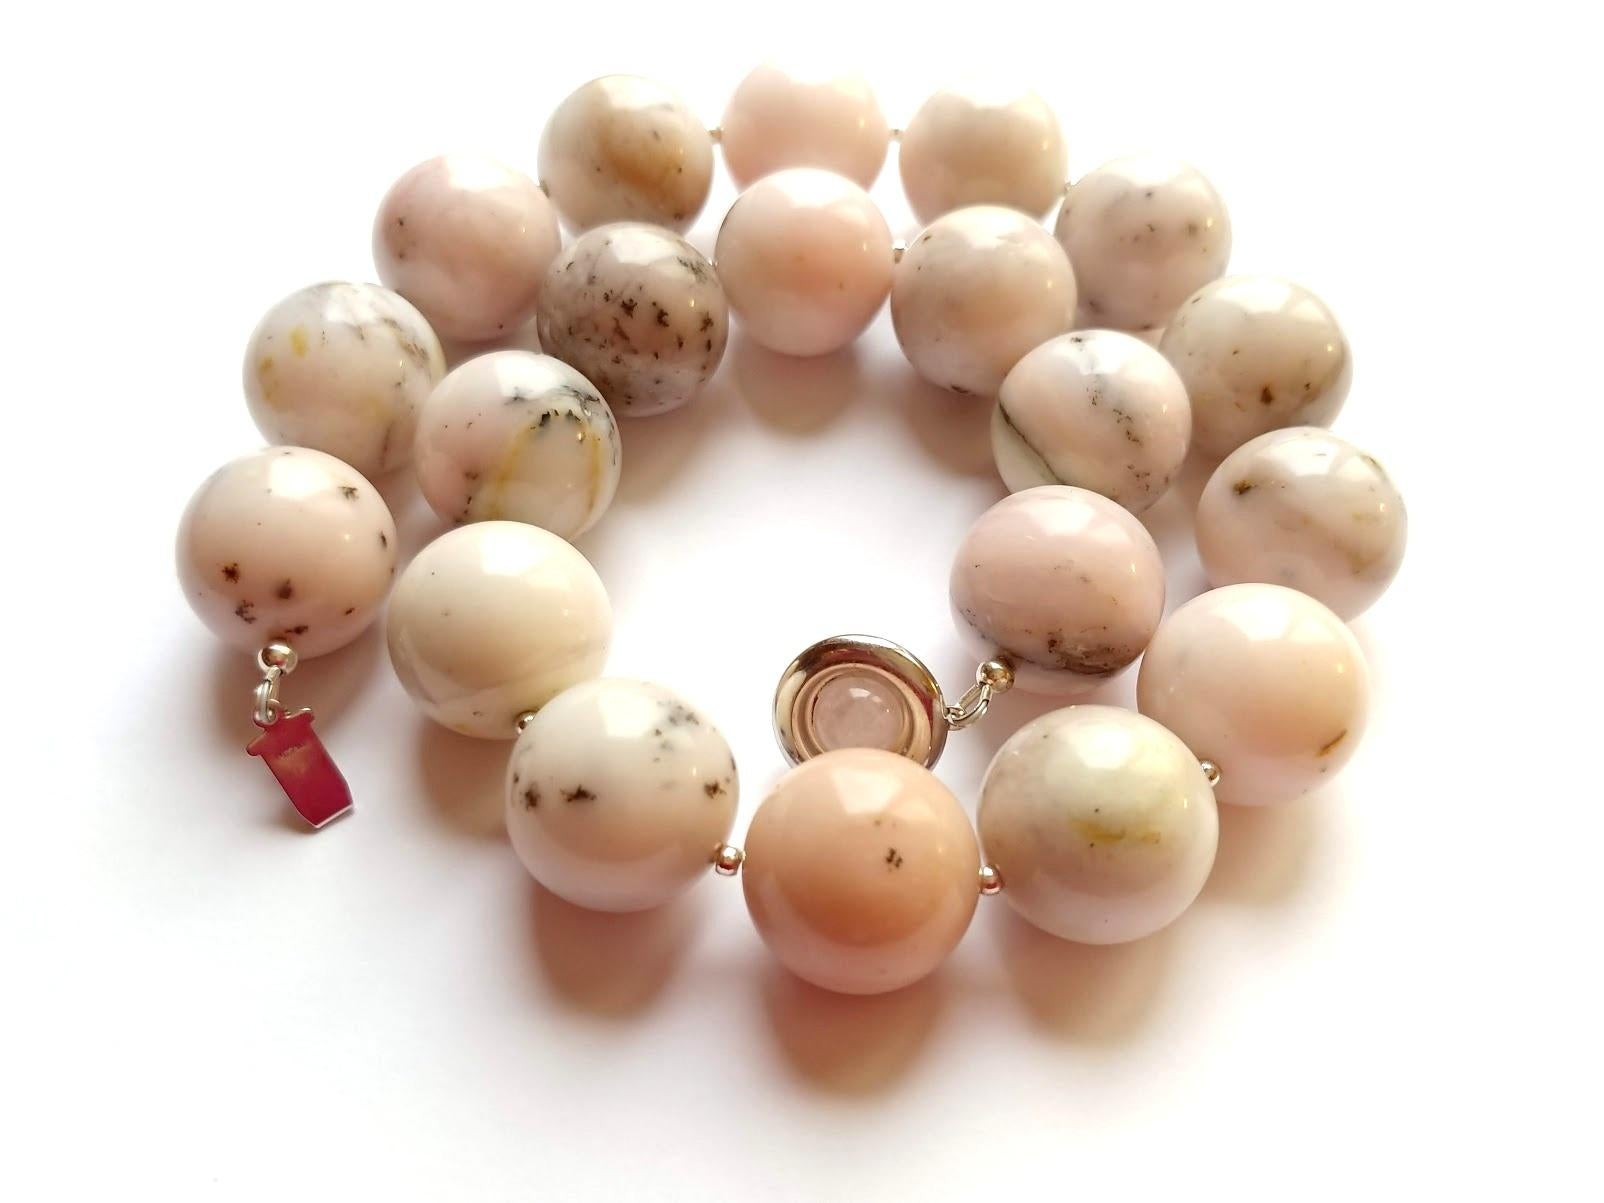 The length of the necklace is 18 inches (45.7 cm). The rare size of one bead is 20 mm.
Beads are a very gentle color, mixed with light pink, soft rose, and soft vanilla. There are also subtle black, white, and gray tones.
The color is authentic and